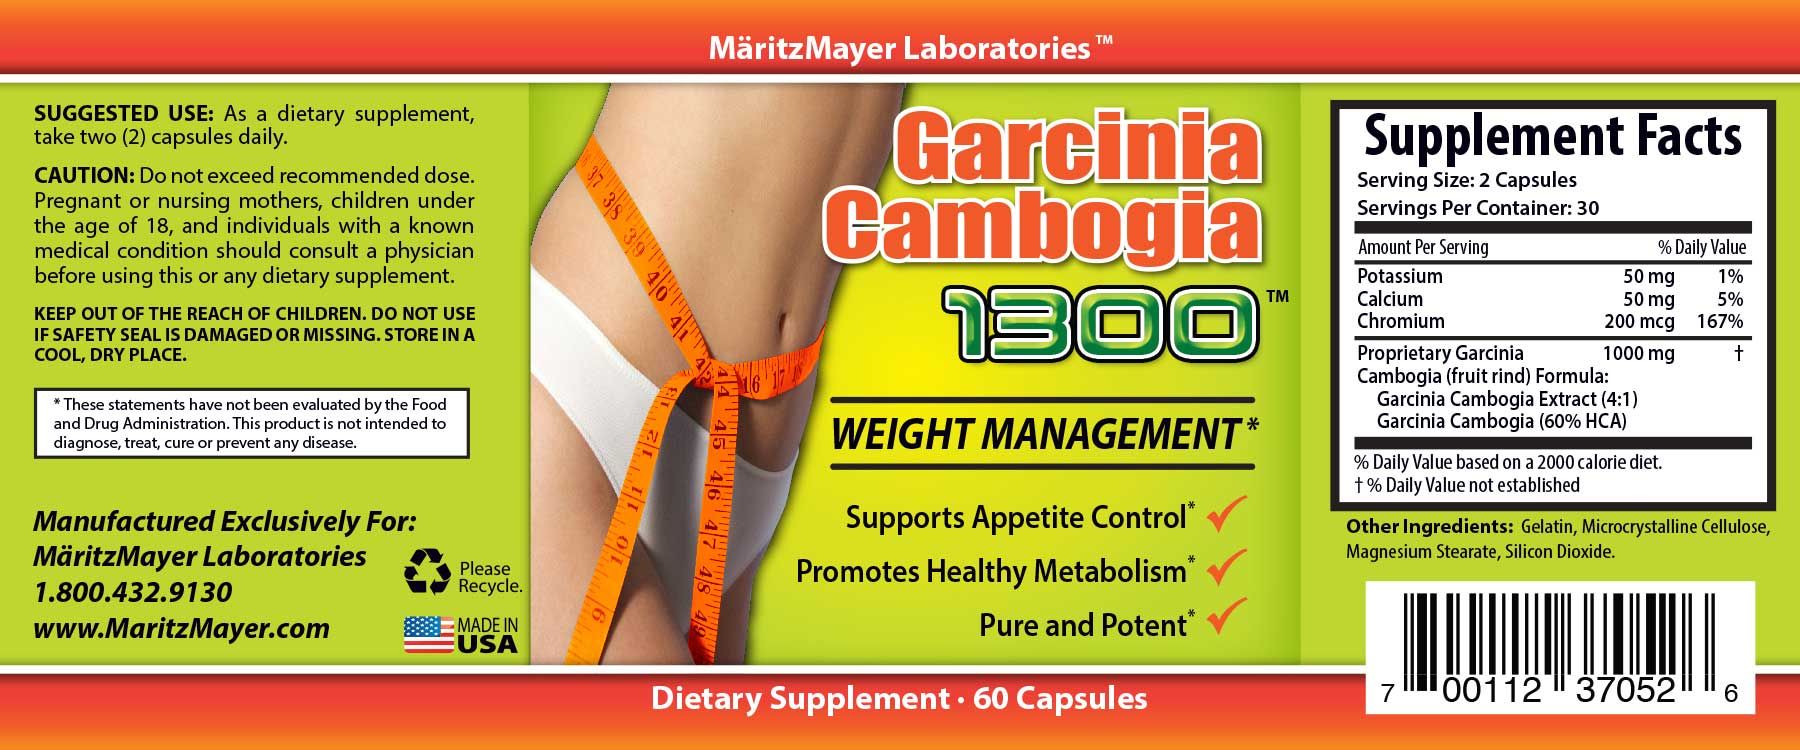 Expected Weight Loss With Garcinia Cambogia